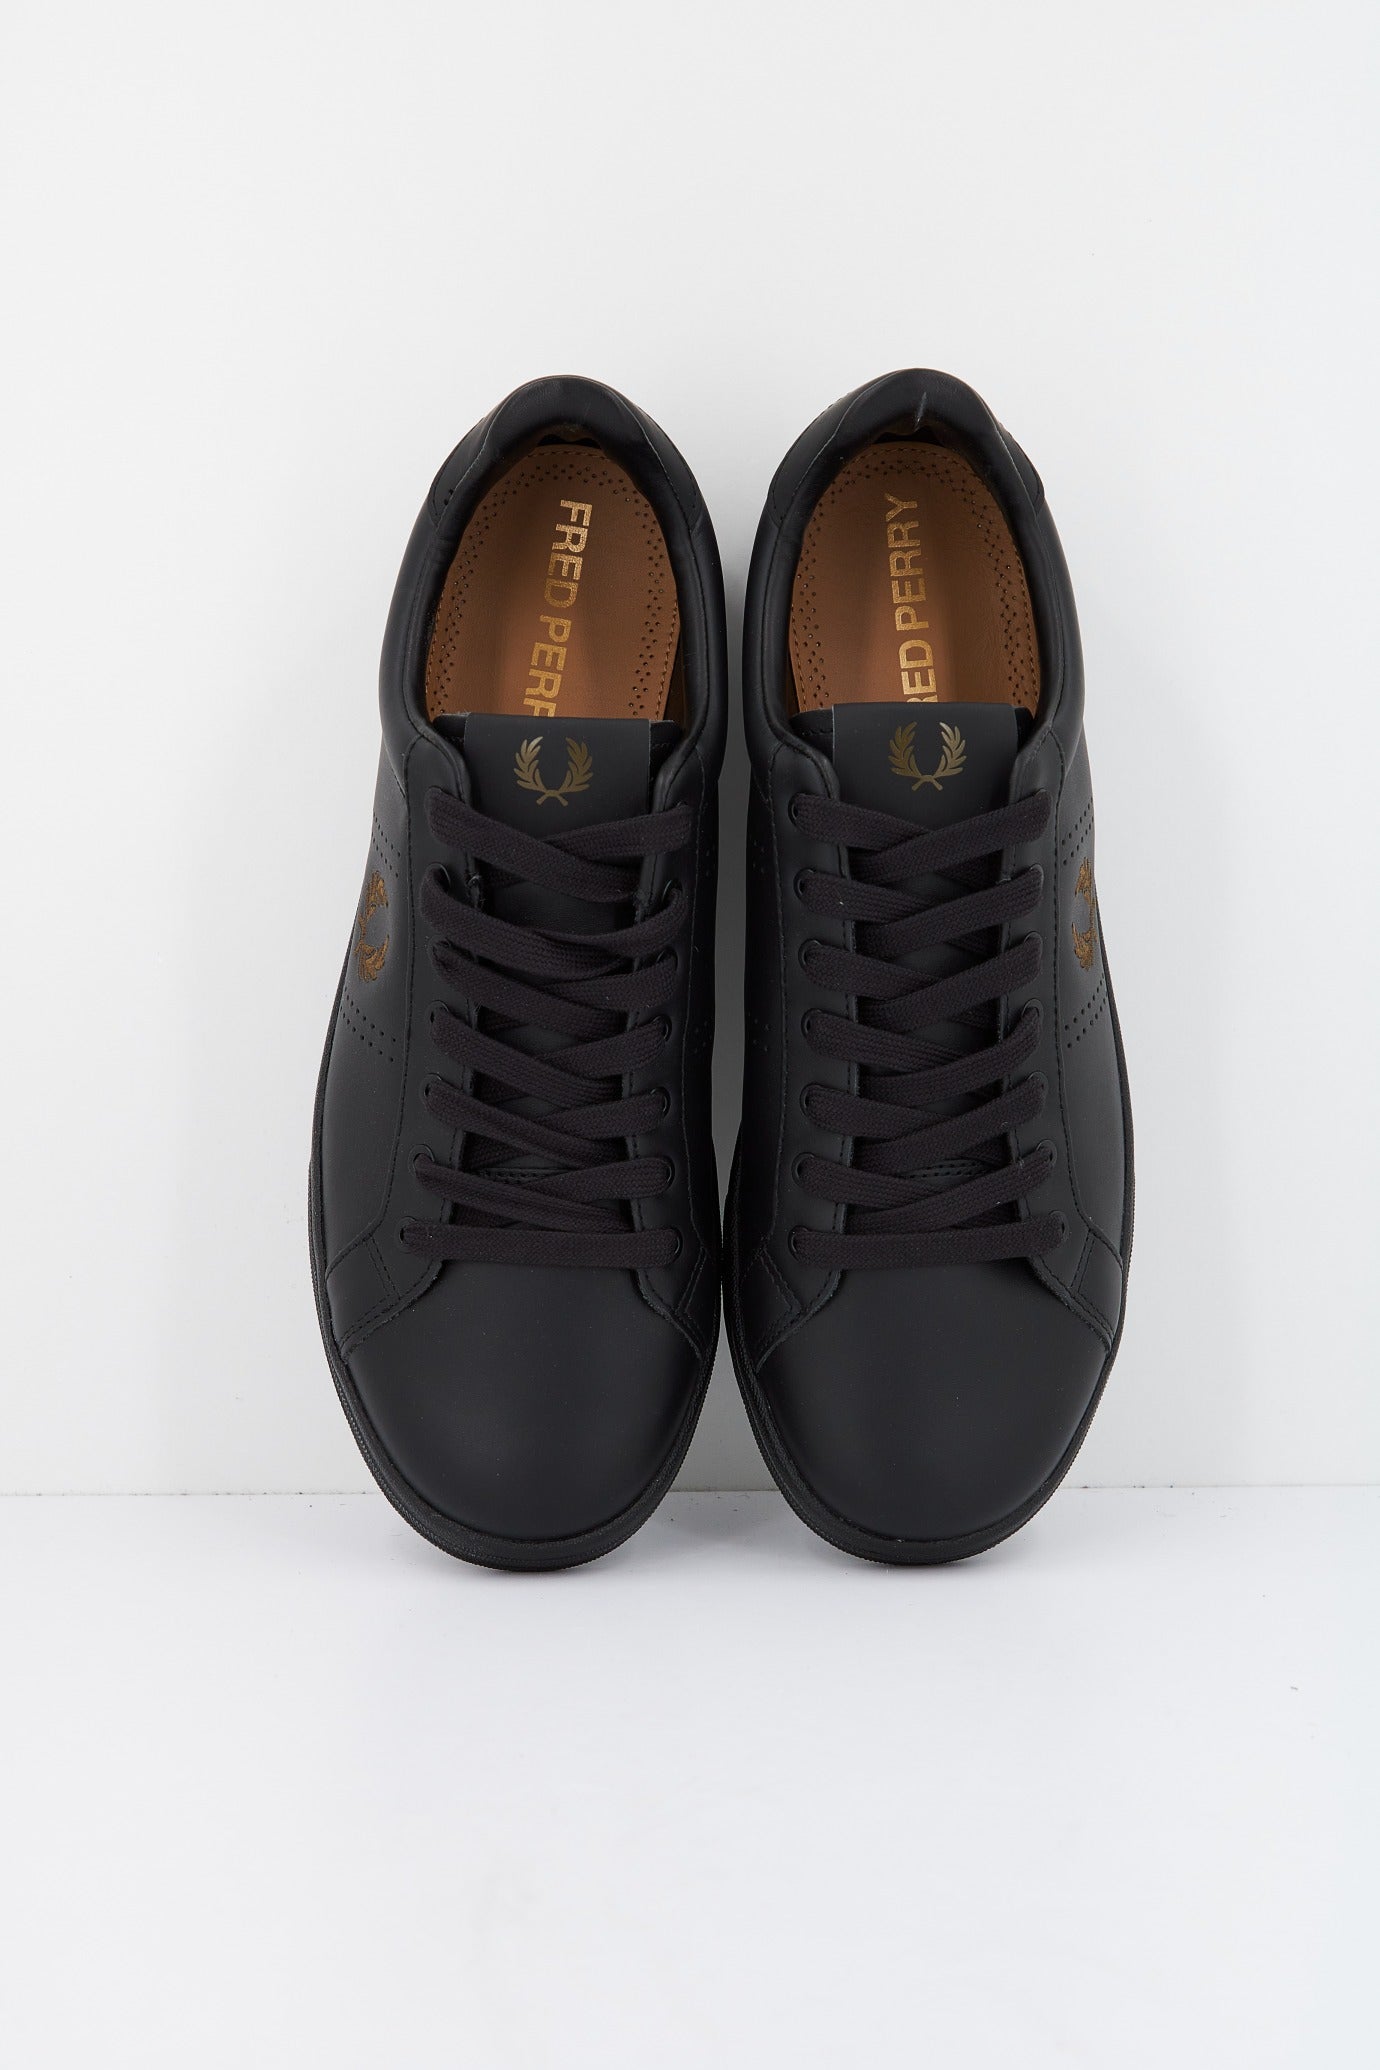 FRED PERRY LEATHER en color NEGRO  (2)